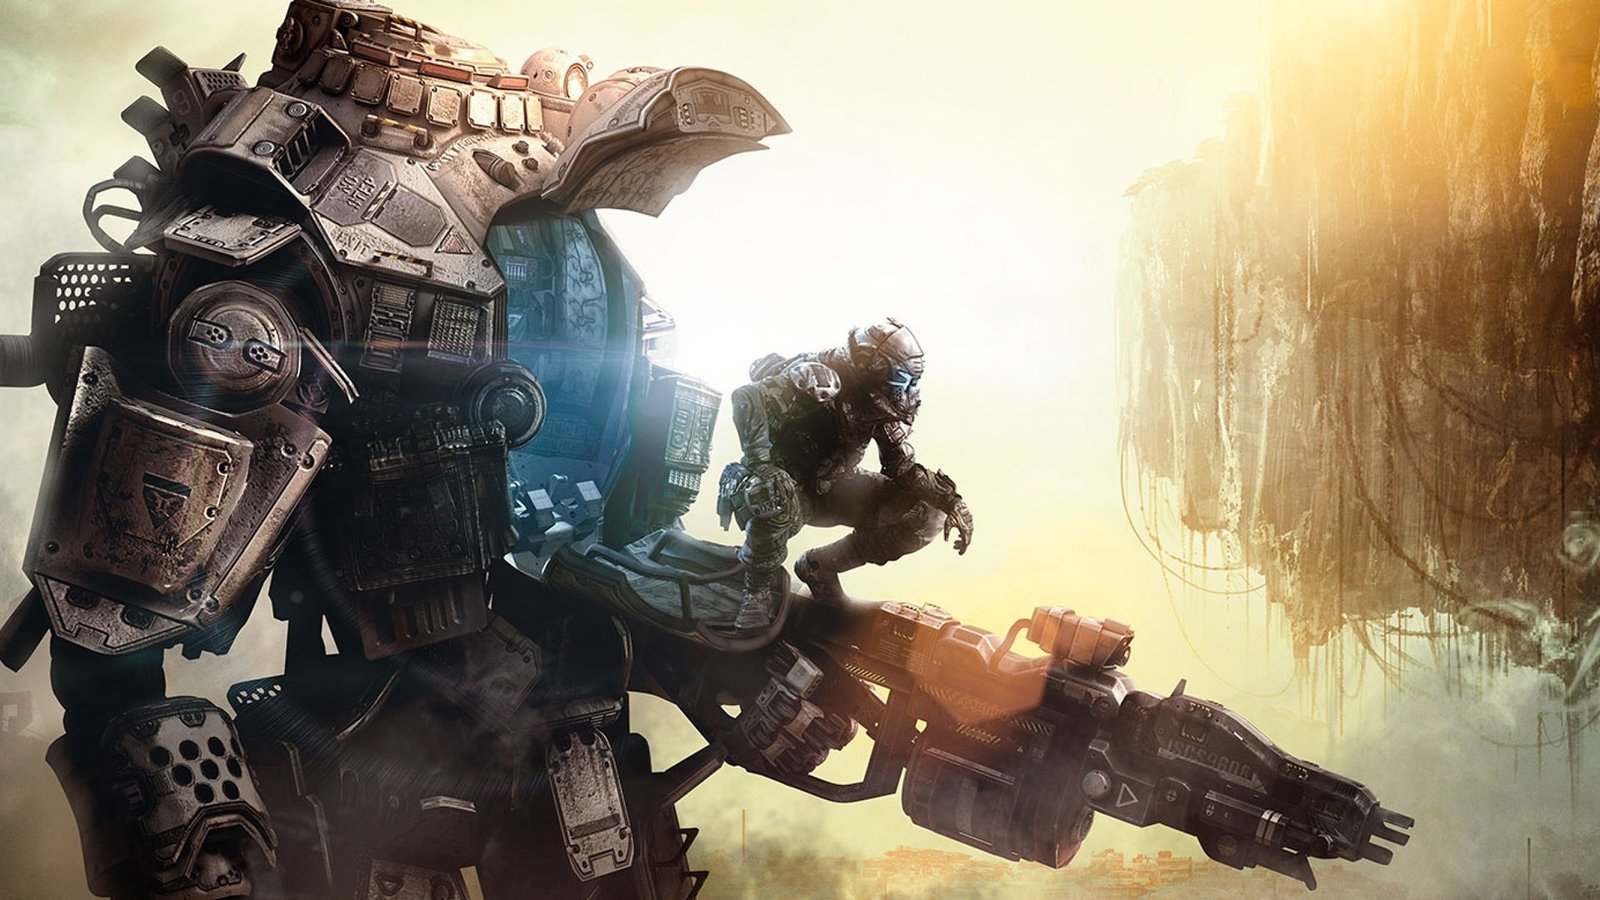 A eulogy for Titanfall, a shooter that deserved higher